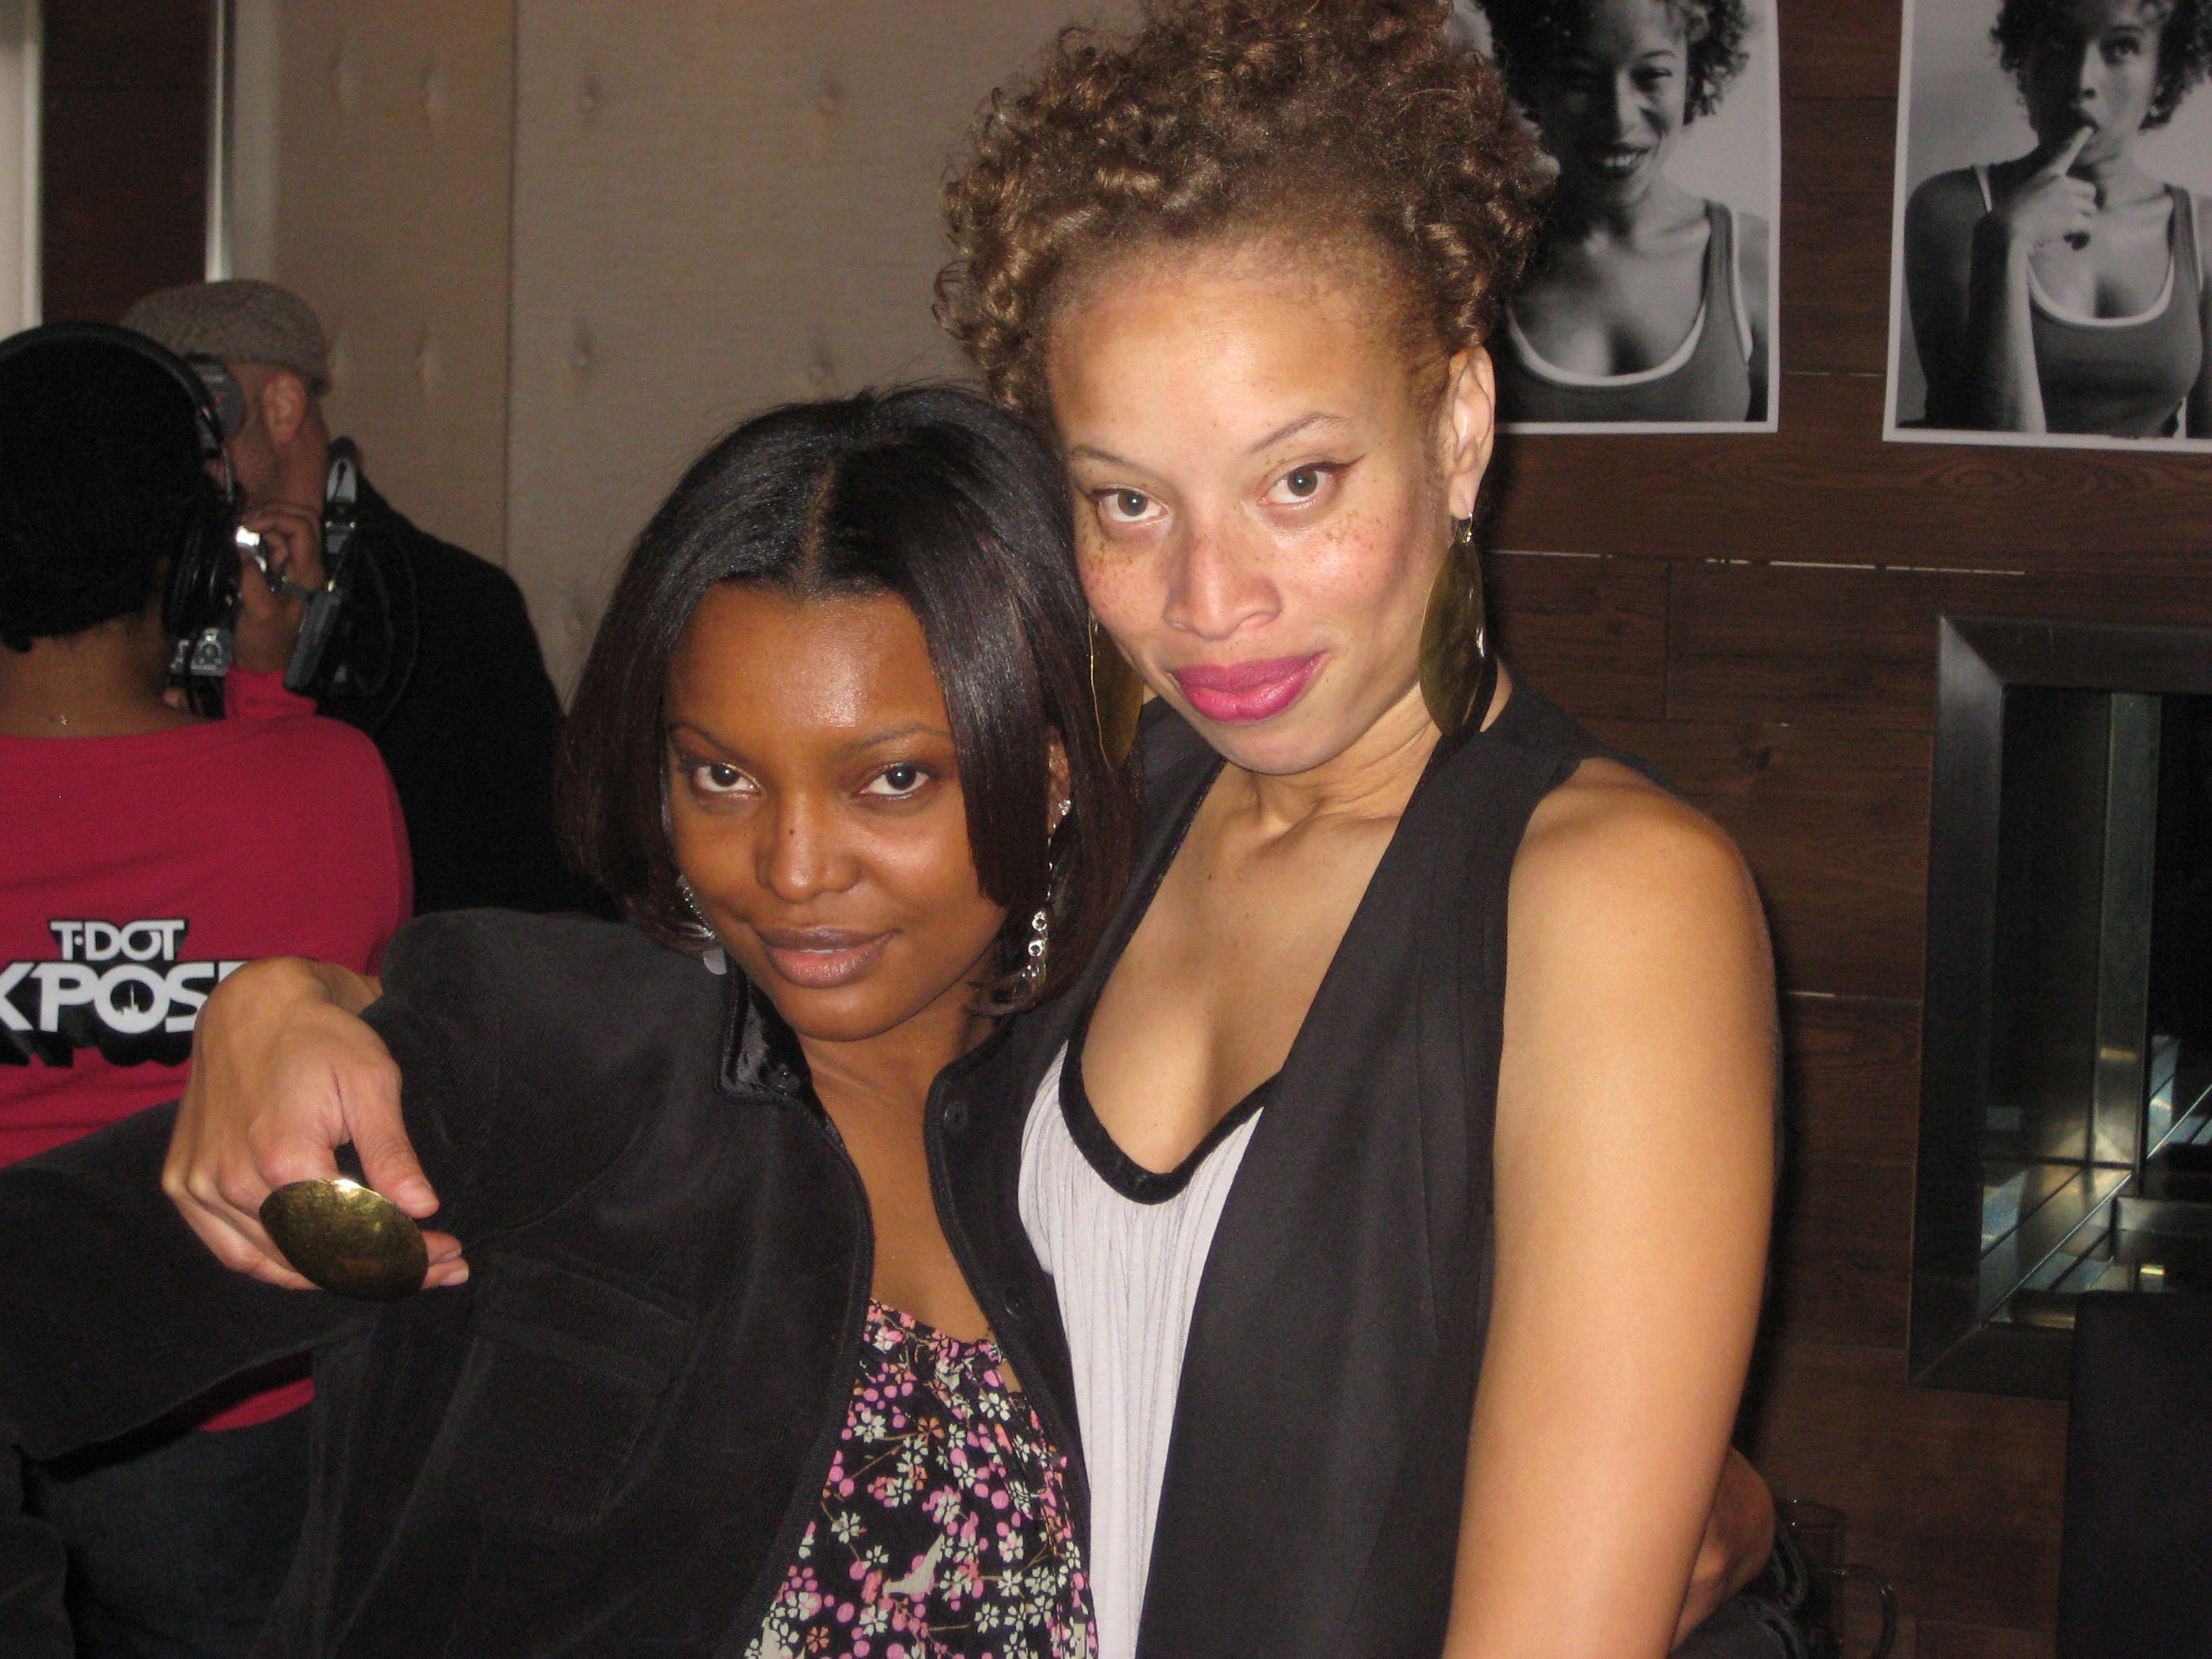 Raven Cinello, Actress with Stacey McKenzie, the International Supermodel and TV Personality at her Walk This Way Workshops in Toronto.